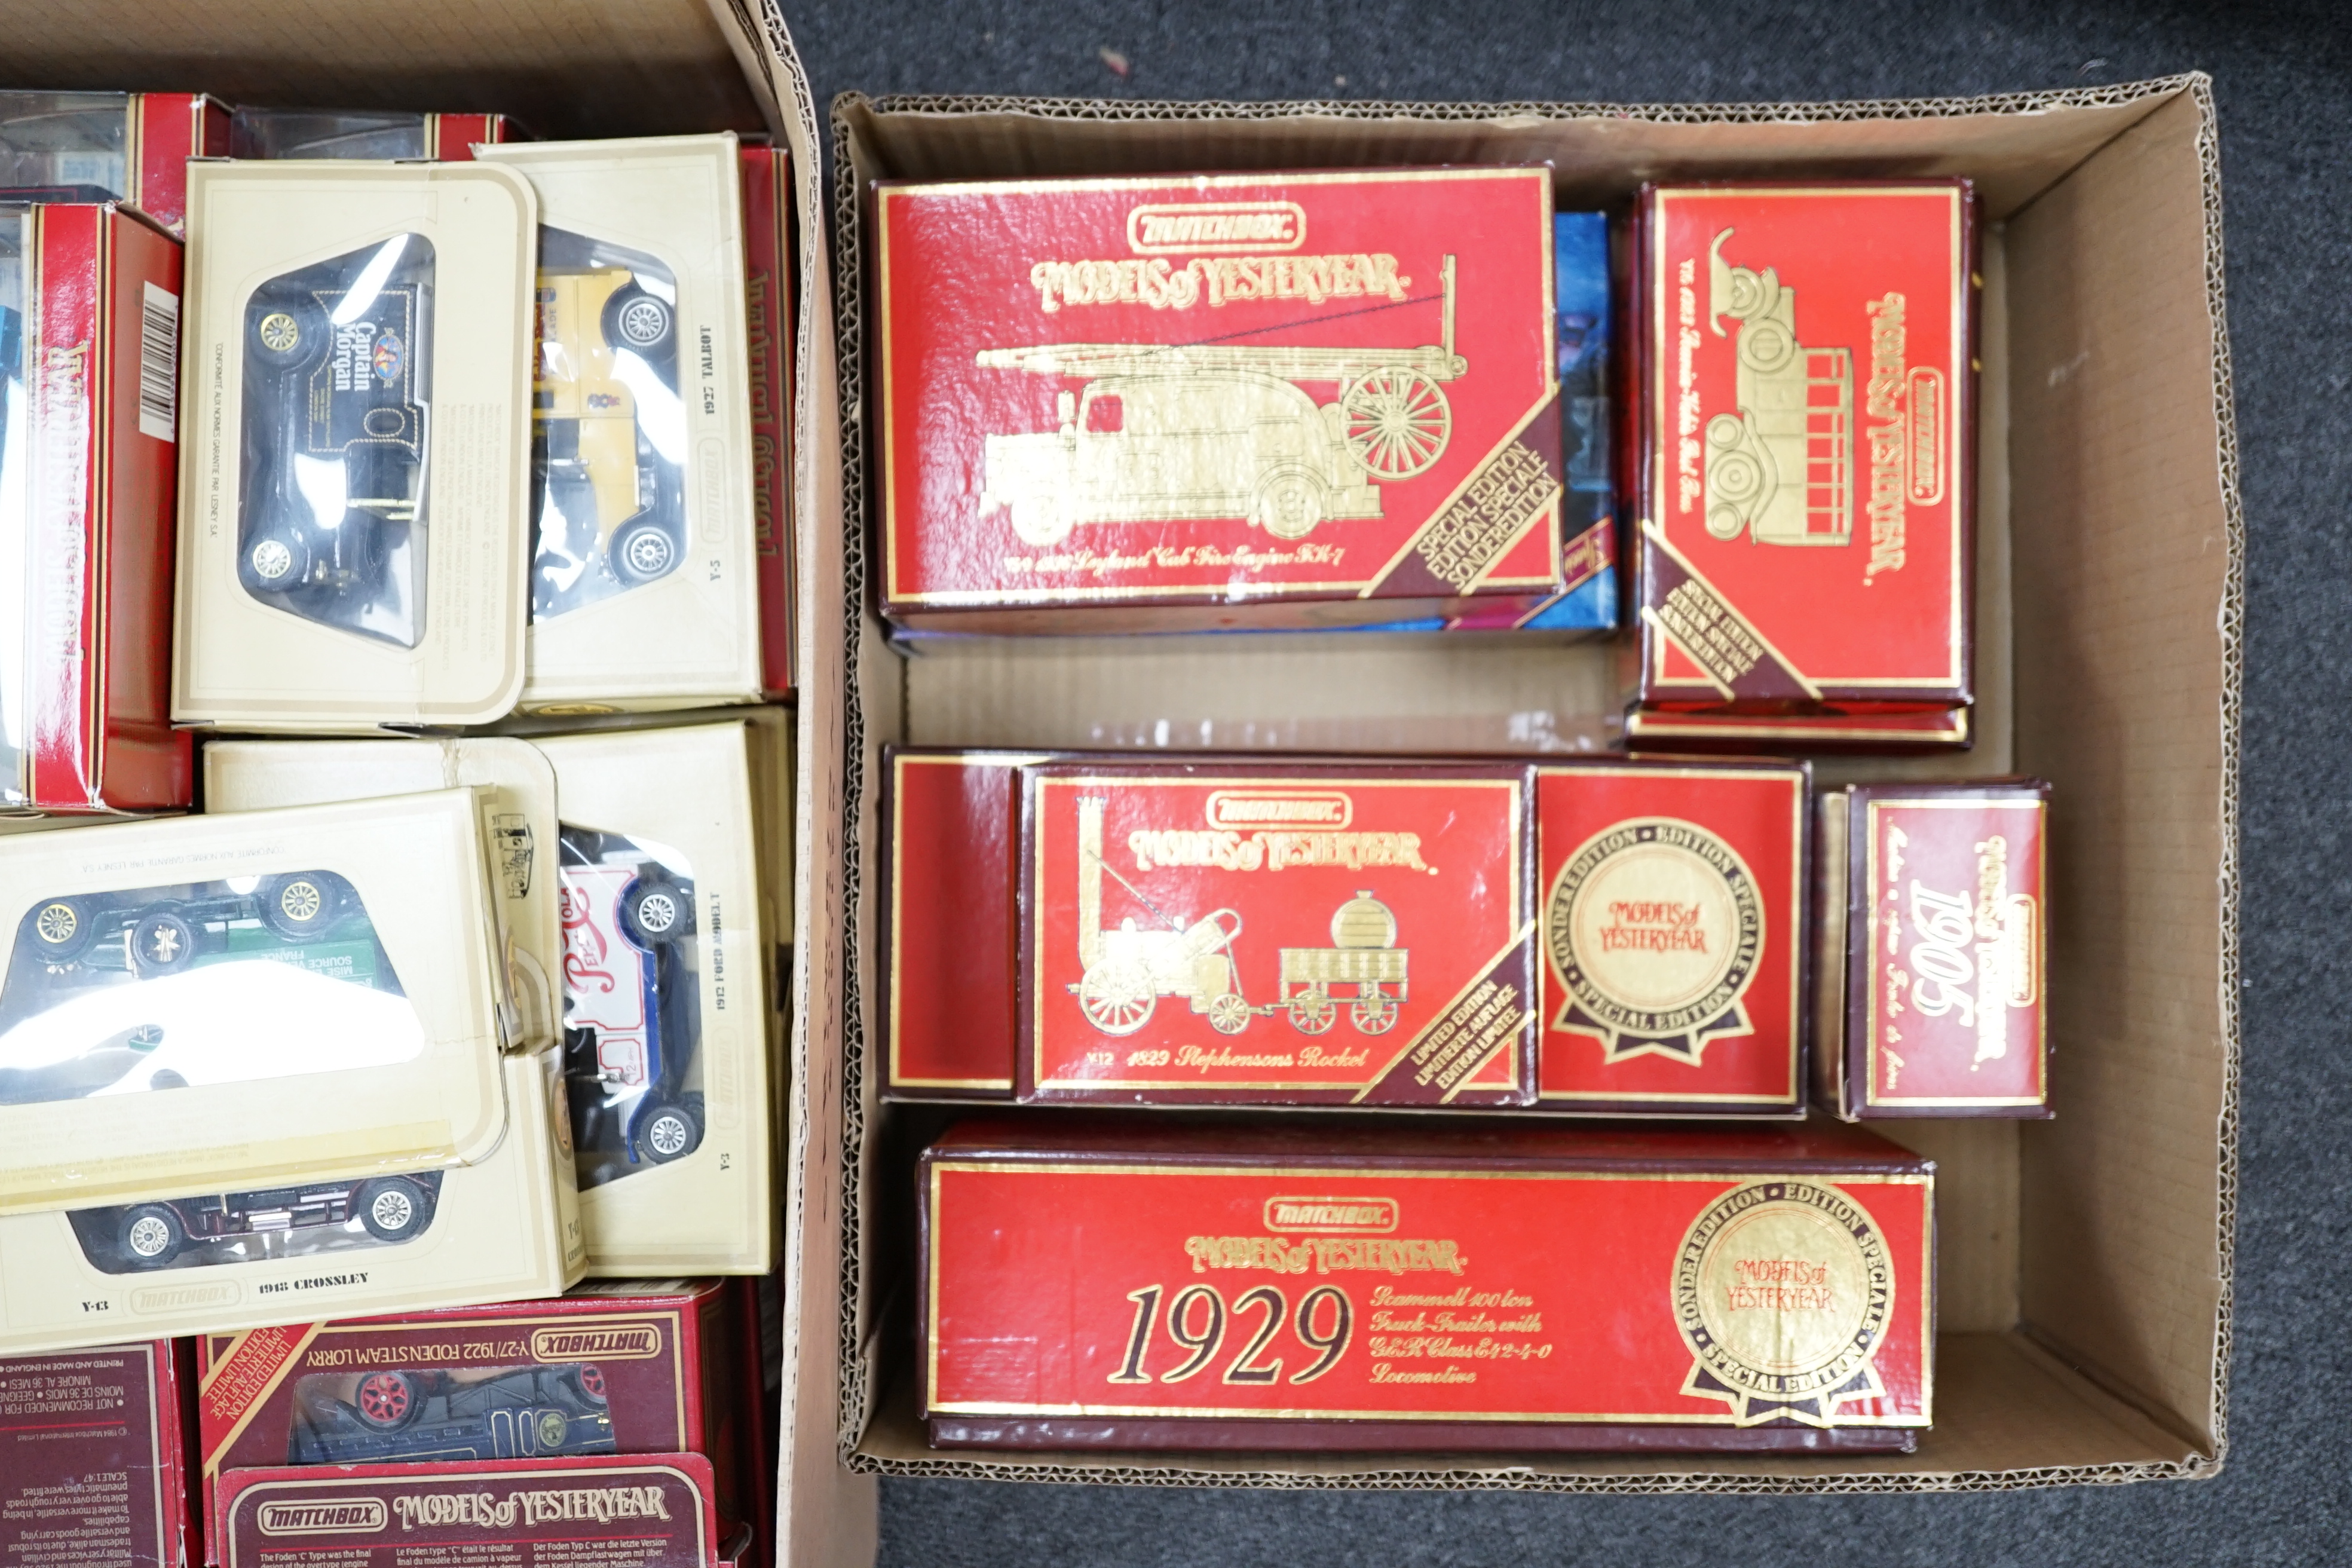 Sixty-six Matchbox Models of Yesteryear, in cream or maroon era boxes, including cars, commercial vehicles, fire engines, a Stephenson’s Rocket, etc.